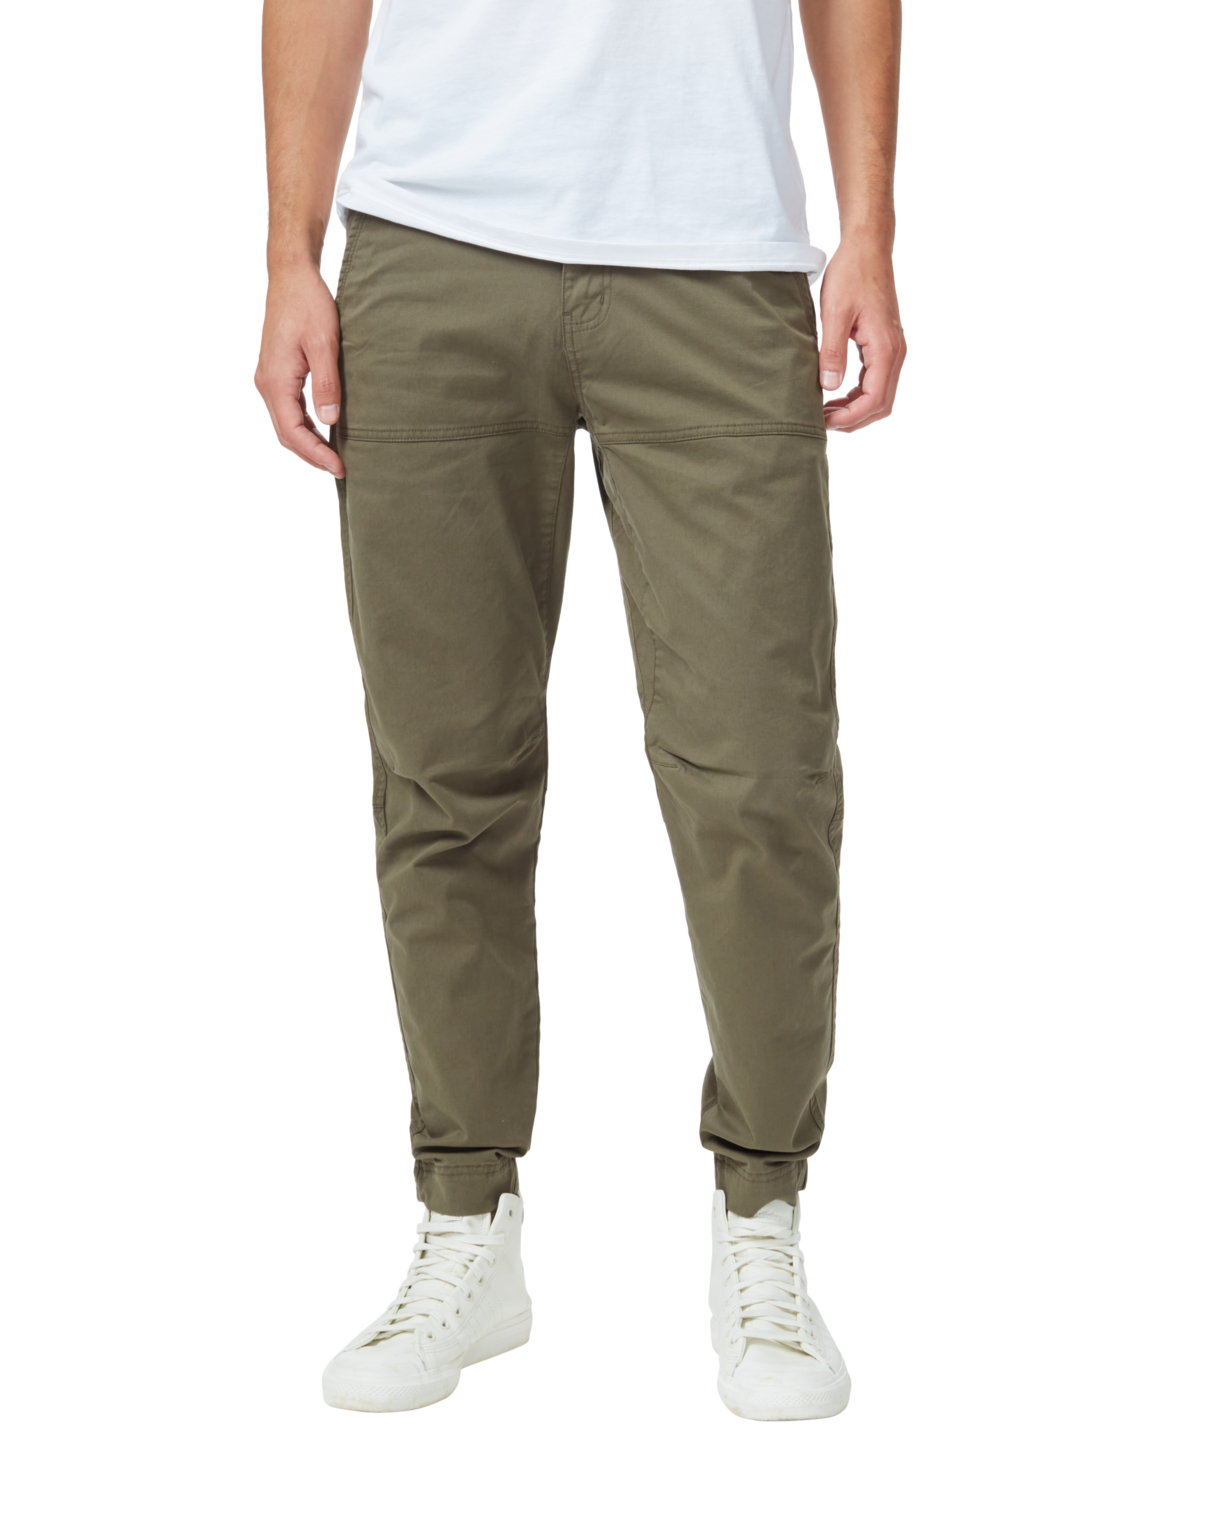 Tentree Twill Everyday Jogger - Yoga trousers - Men's